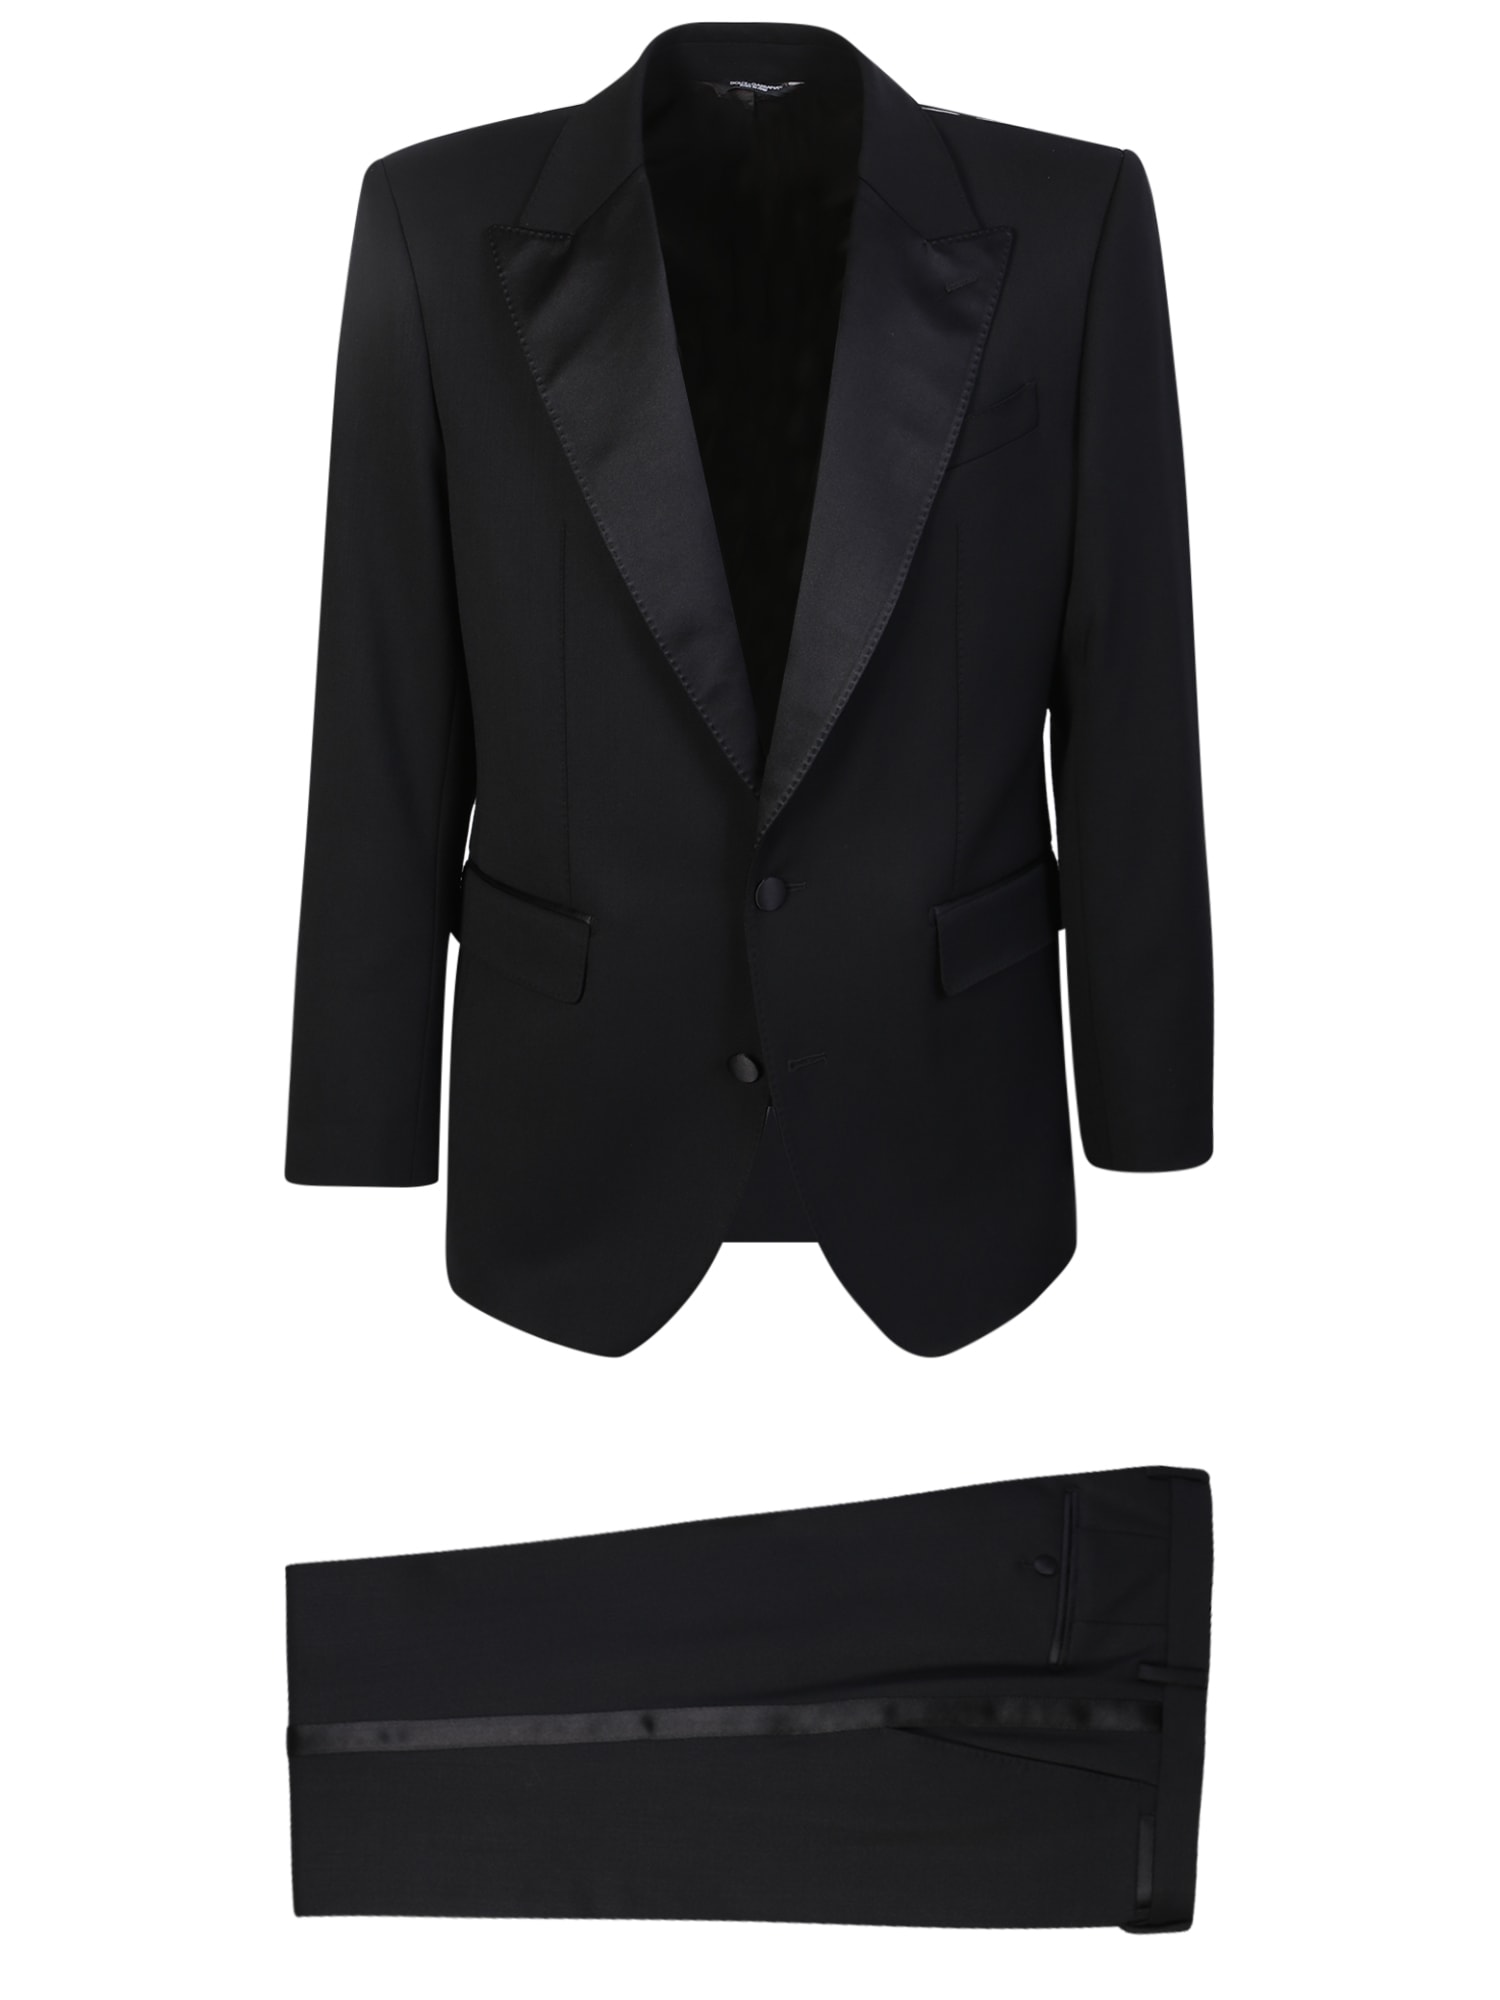 DOLCE & GABBANA SINGLE-BREASTED SUIT